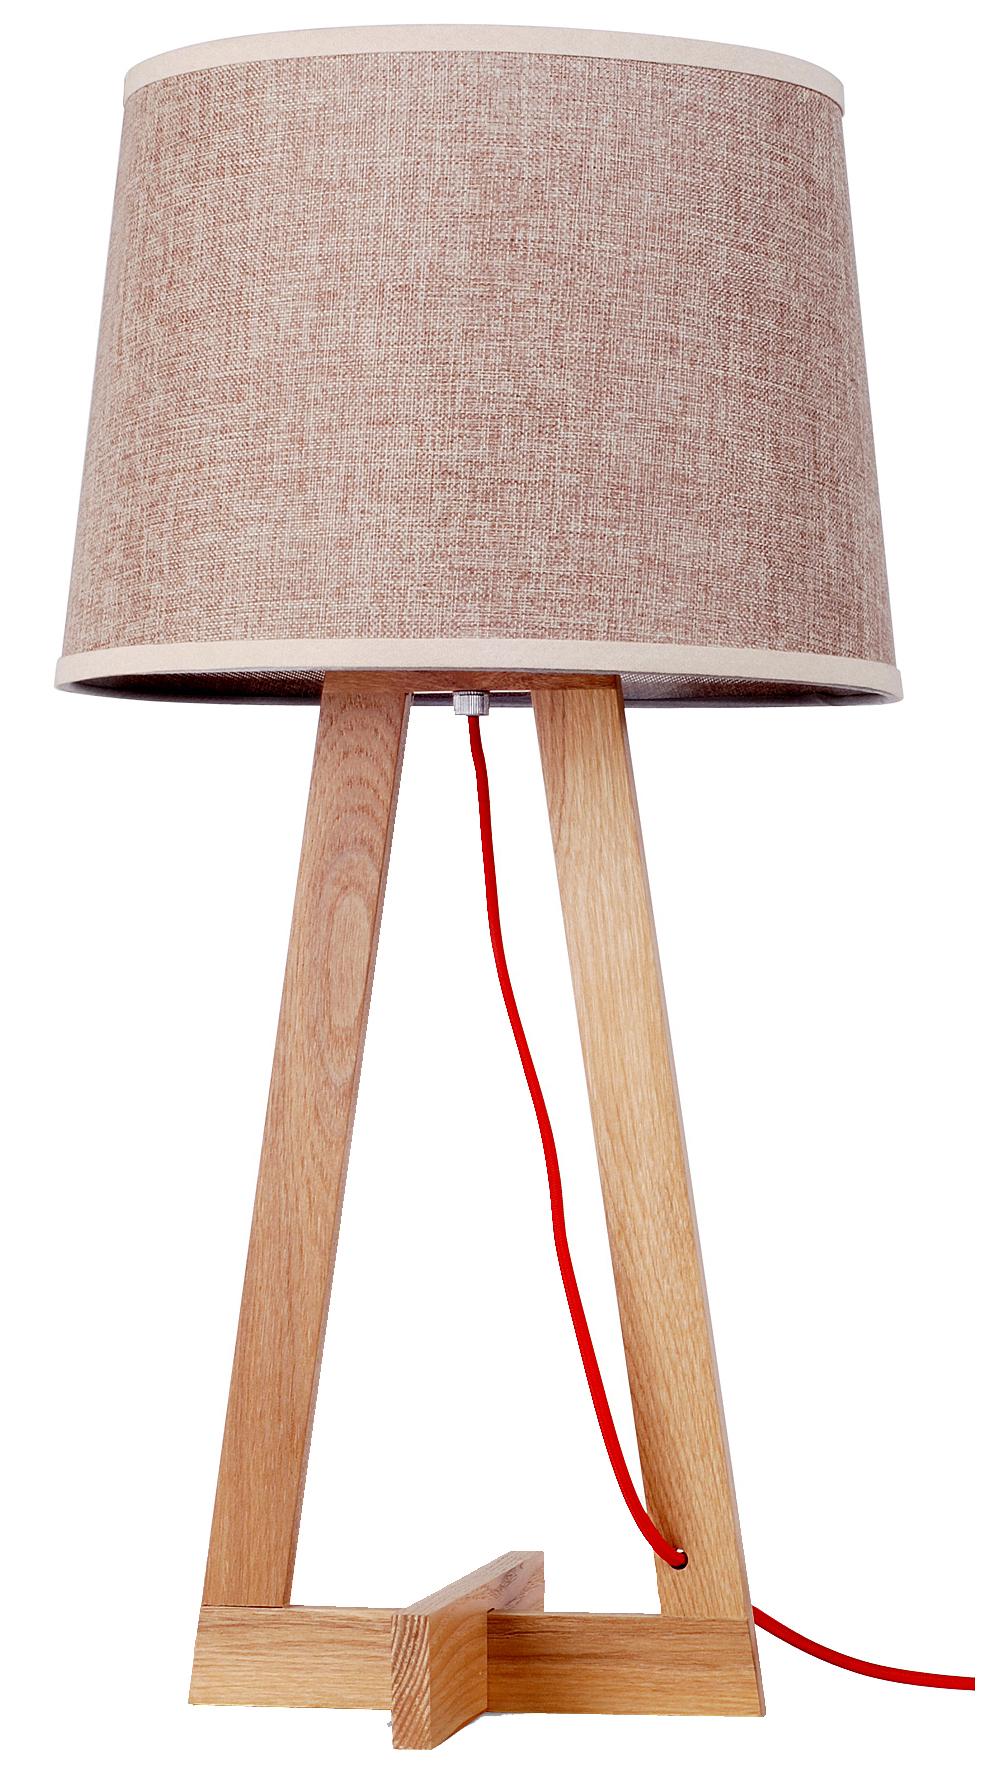 Contemporary wooden table lamp desk lamp